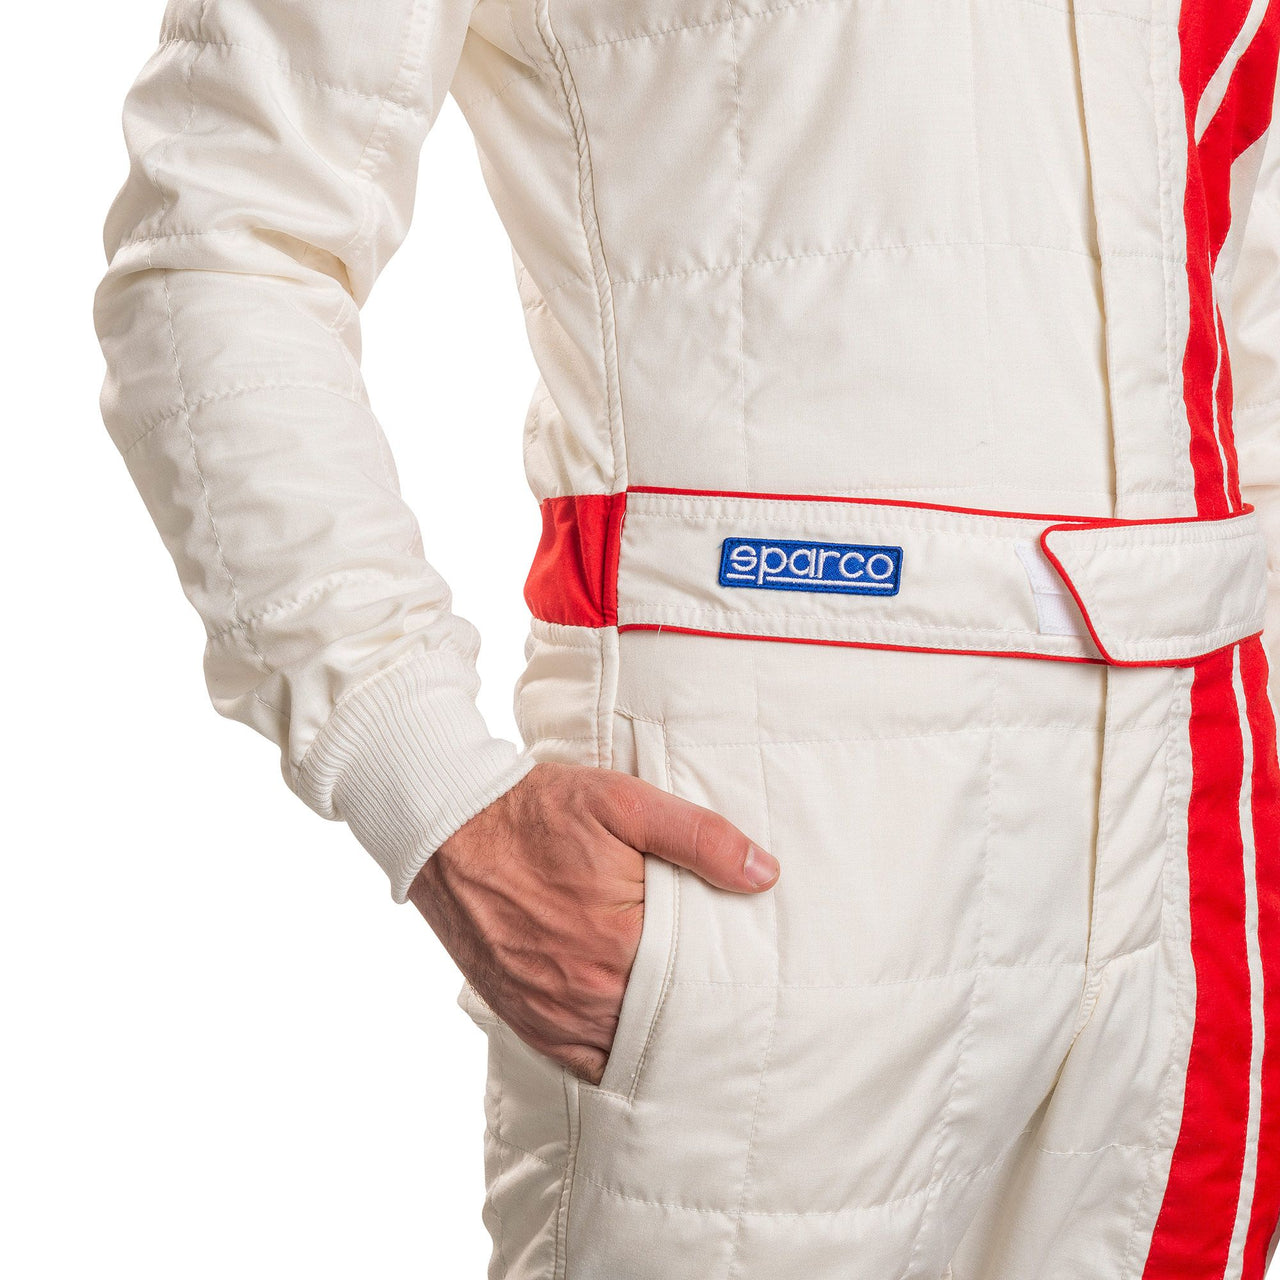 Sparco Vintage Classic Race Suit White / Red Pocket Image